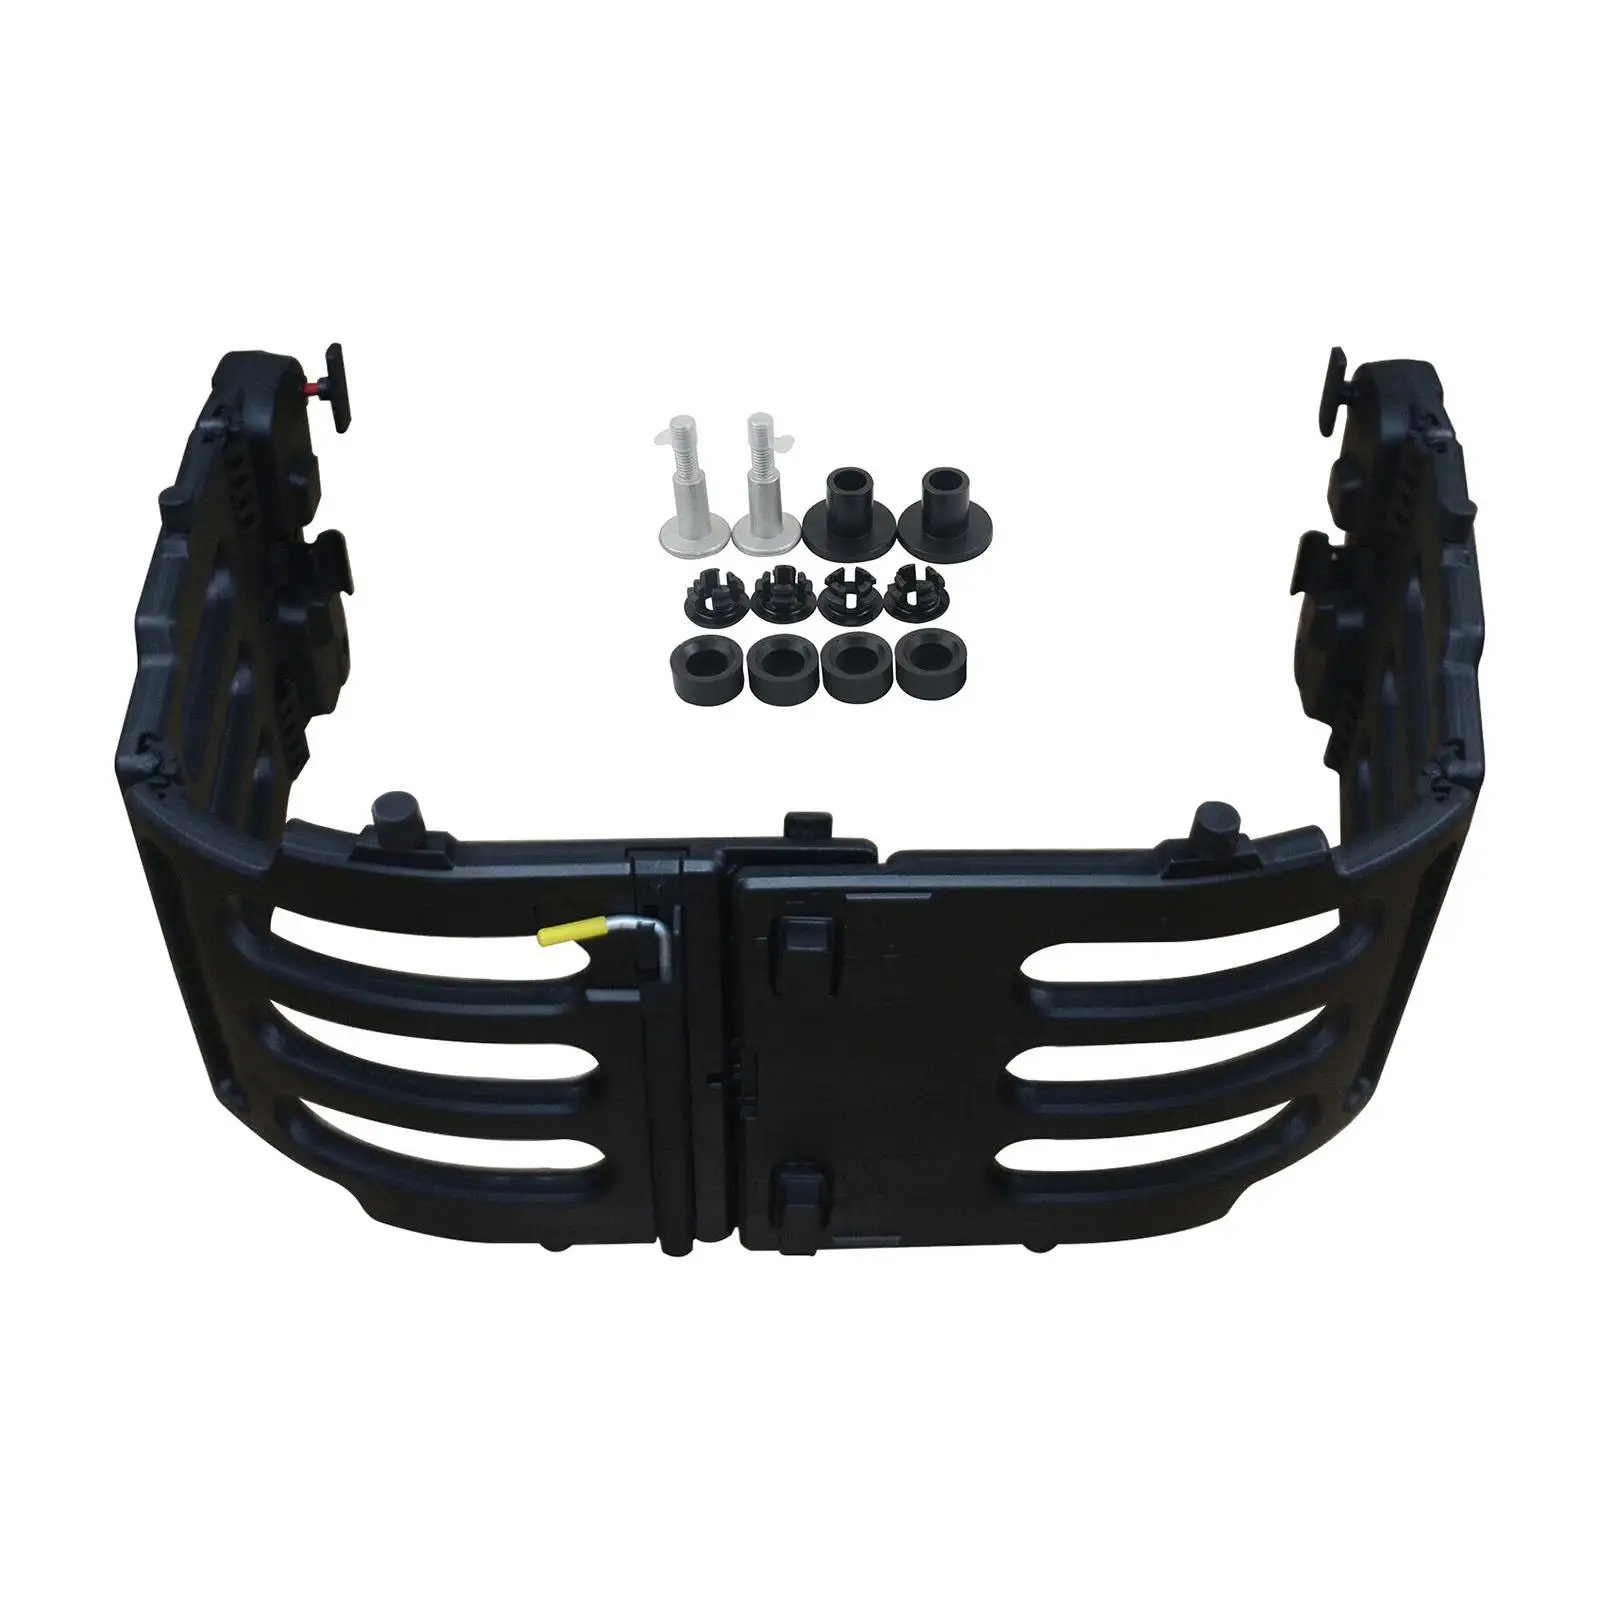 Stowable Tailgate Bed Extender Brackets Kit fl3Z-99286A40-C fl3Z99286A40C for Ford F150 Replaces Accessories Black Spare Parts